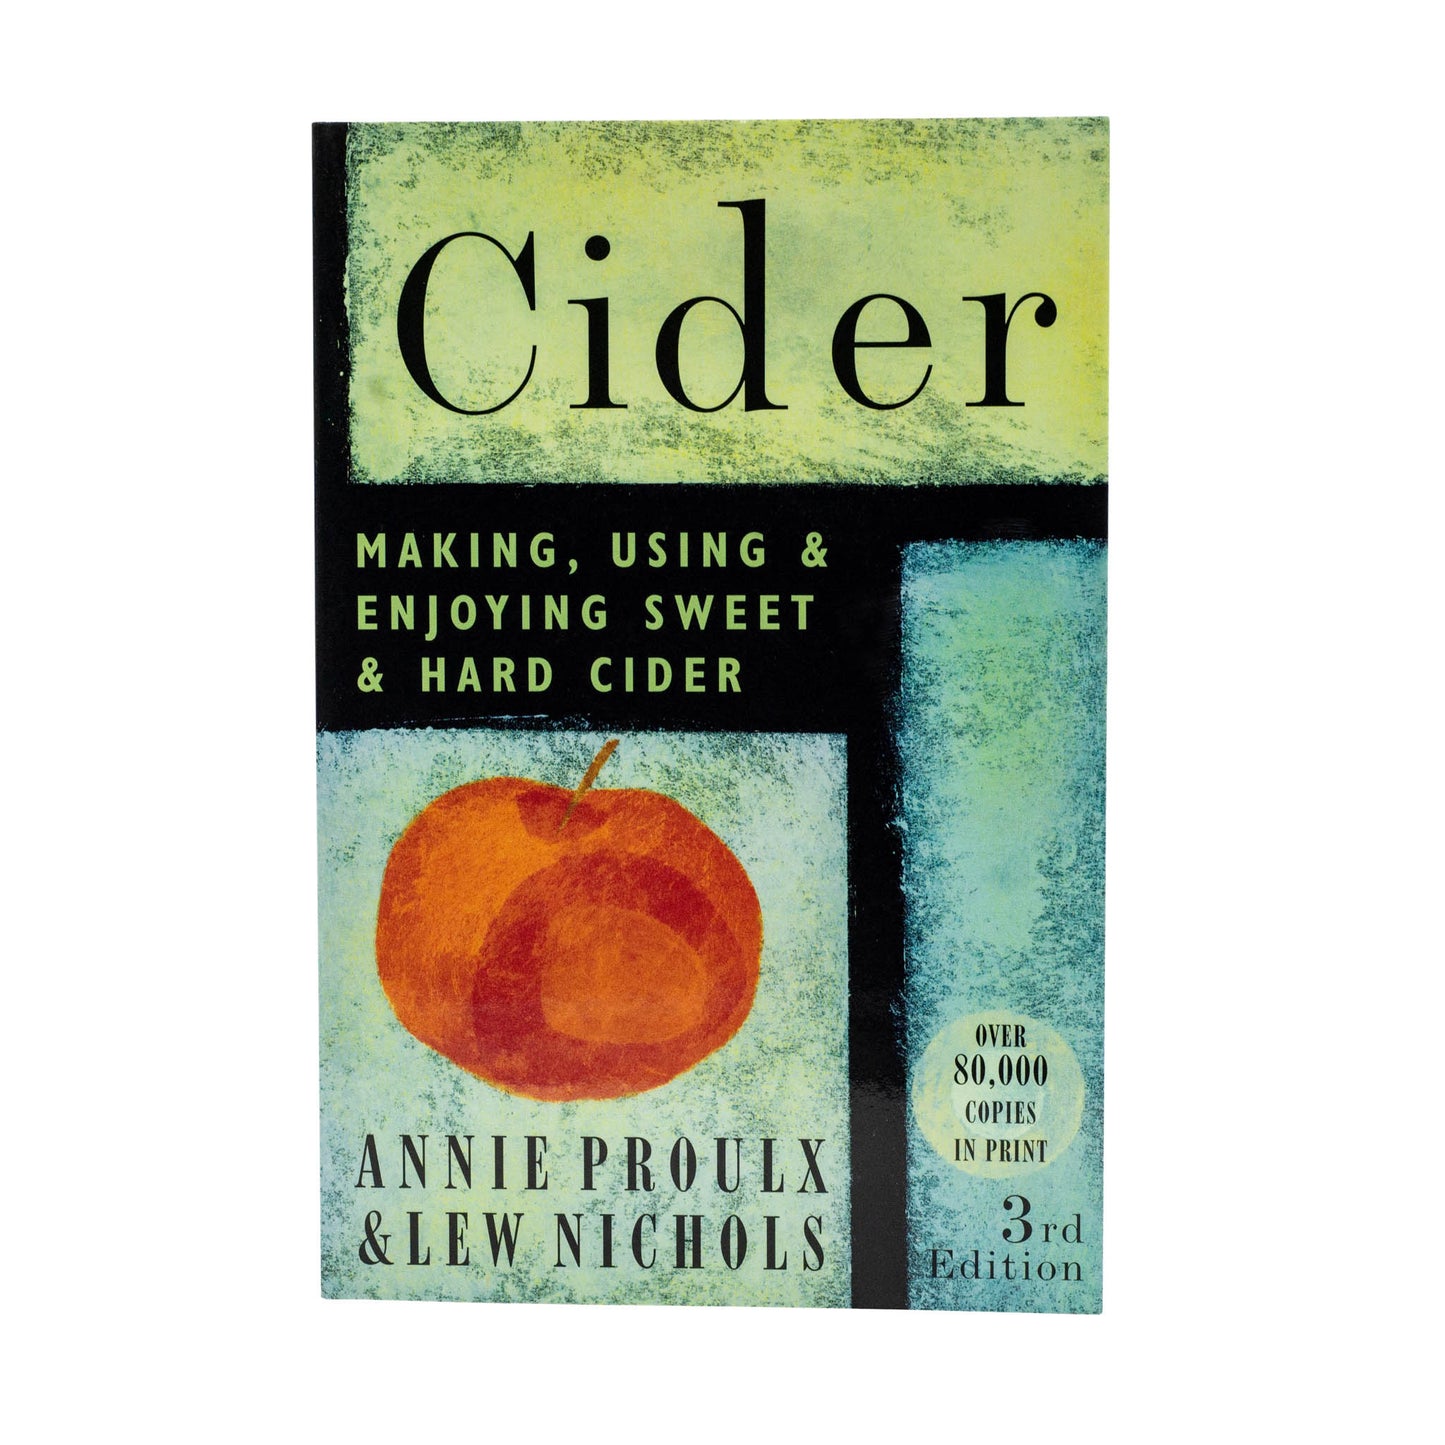 A book on how to make hard cider including fruit preparation, recipes and best equipment to use written by Annie Proulx and Lew Nichols